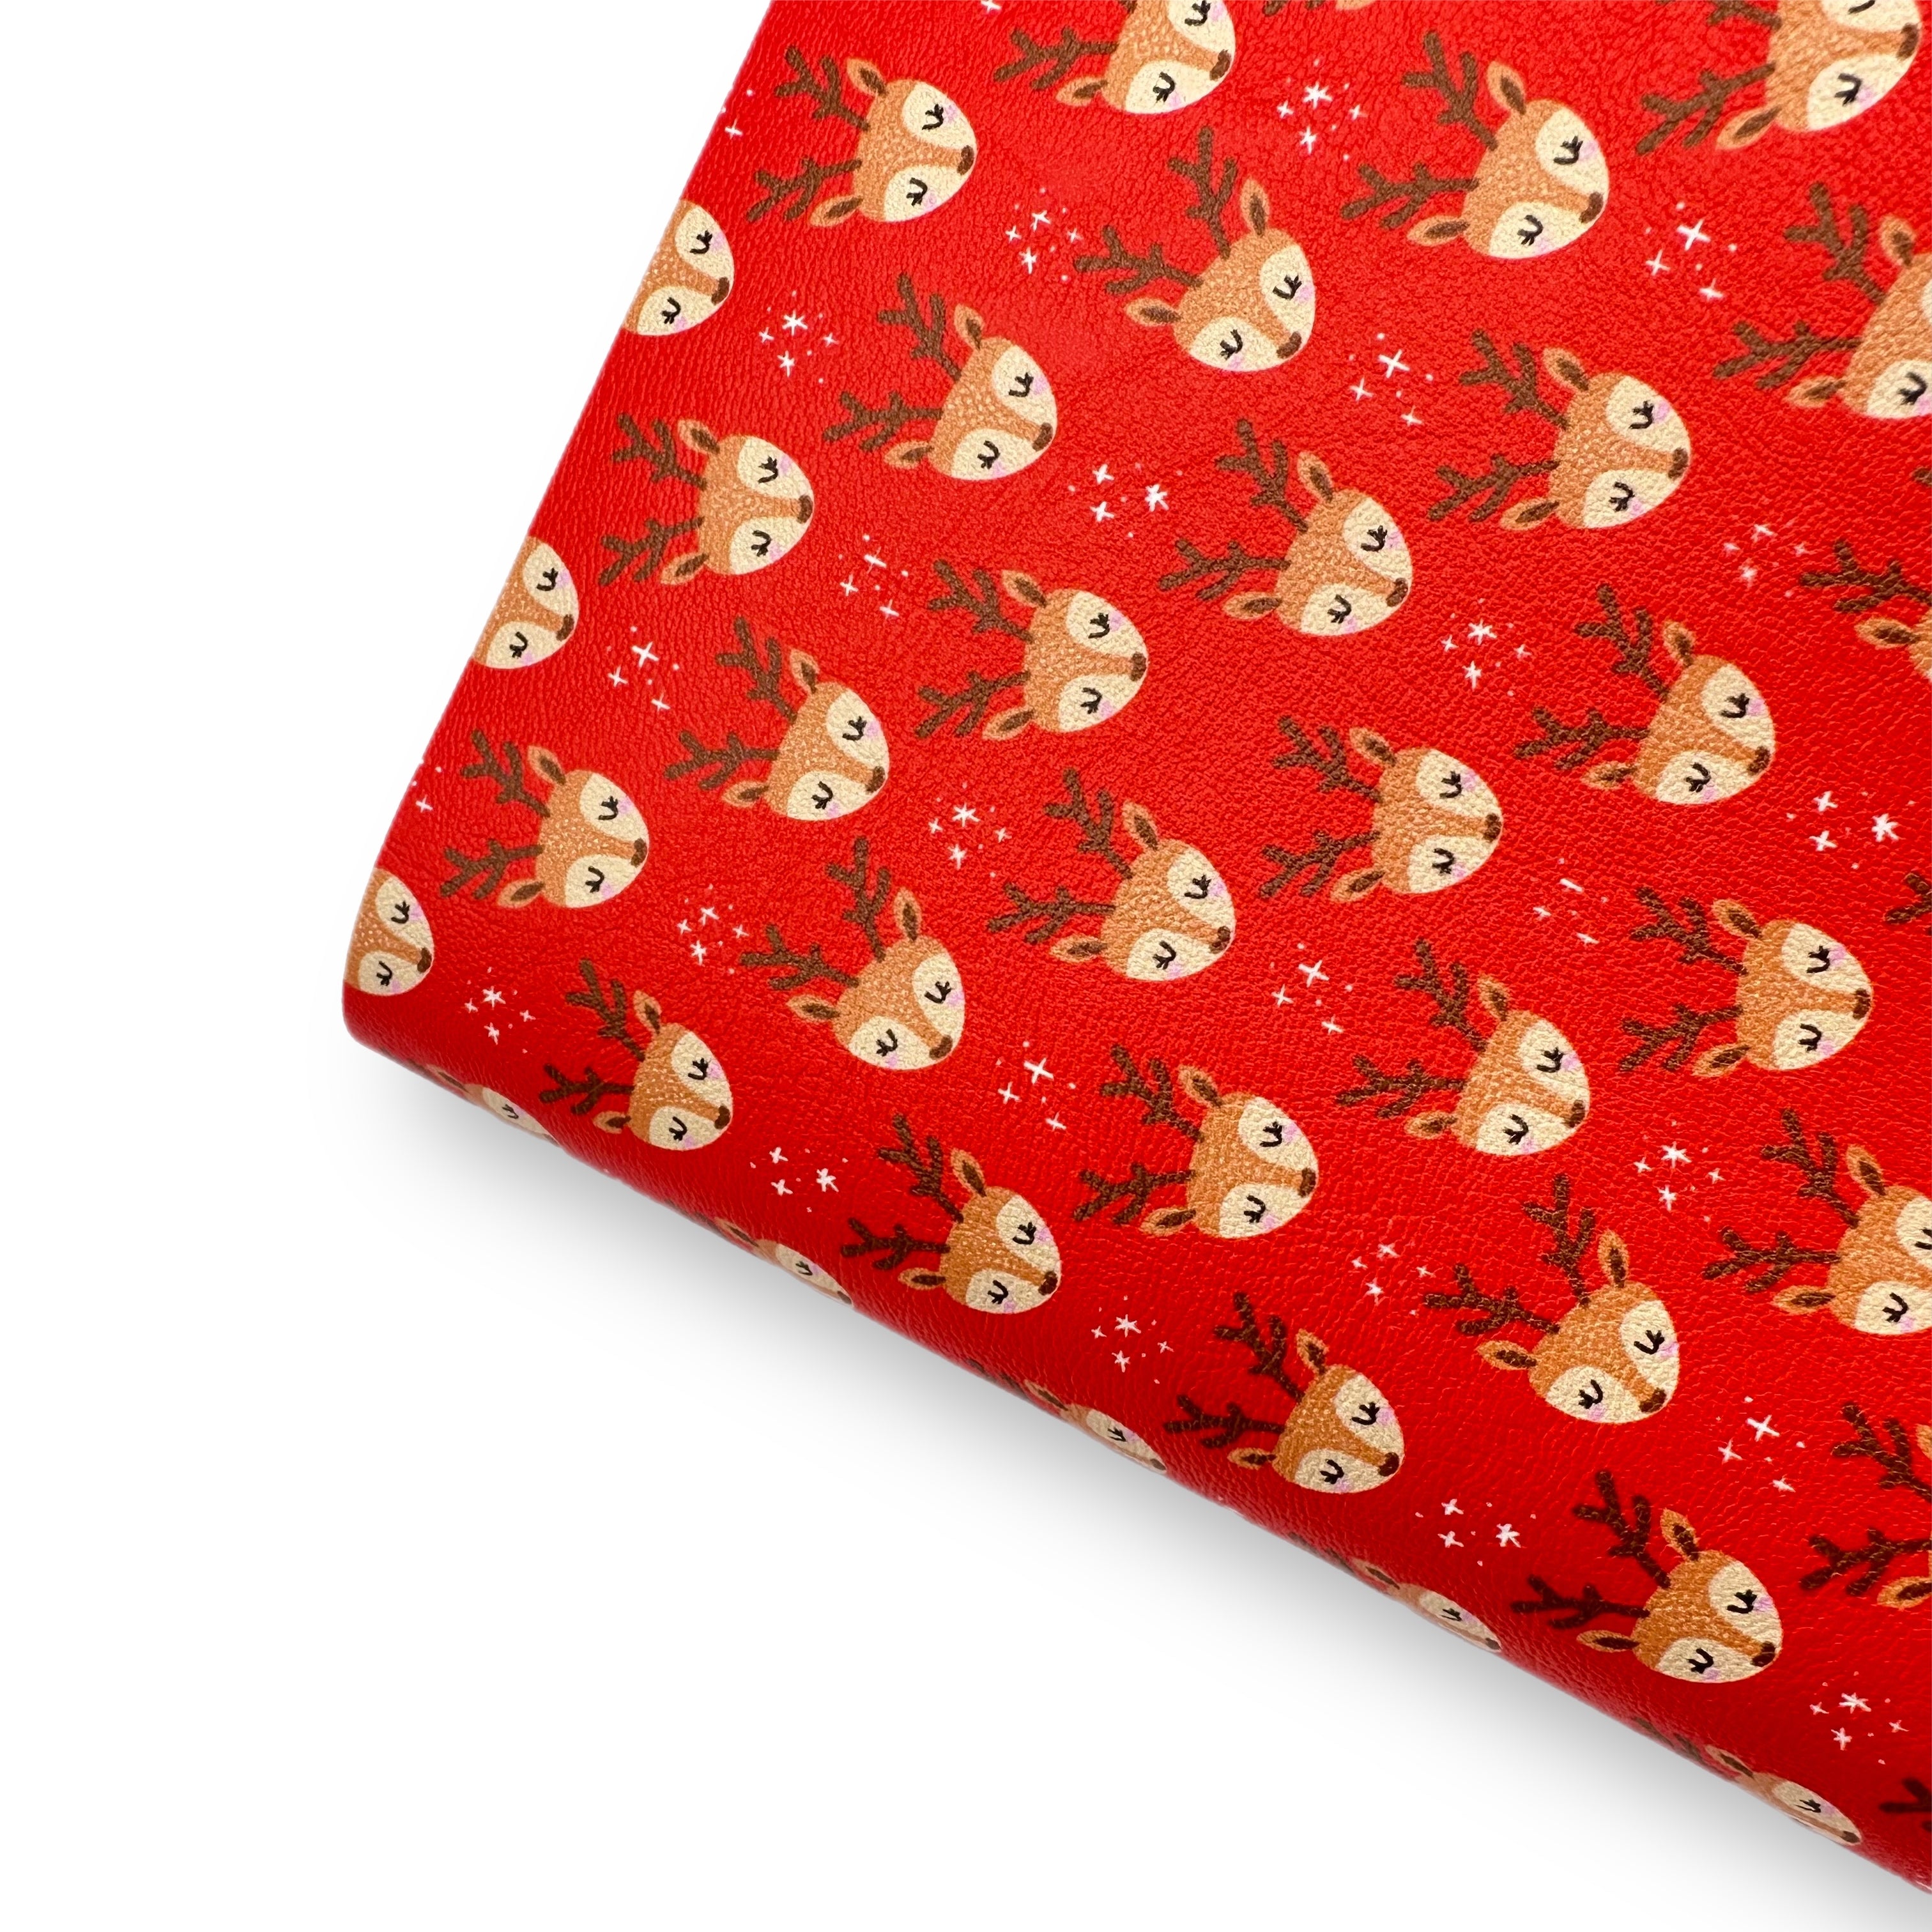 Sweetest Reindeer Premium Faux Leather Fabric Sheets